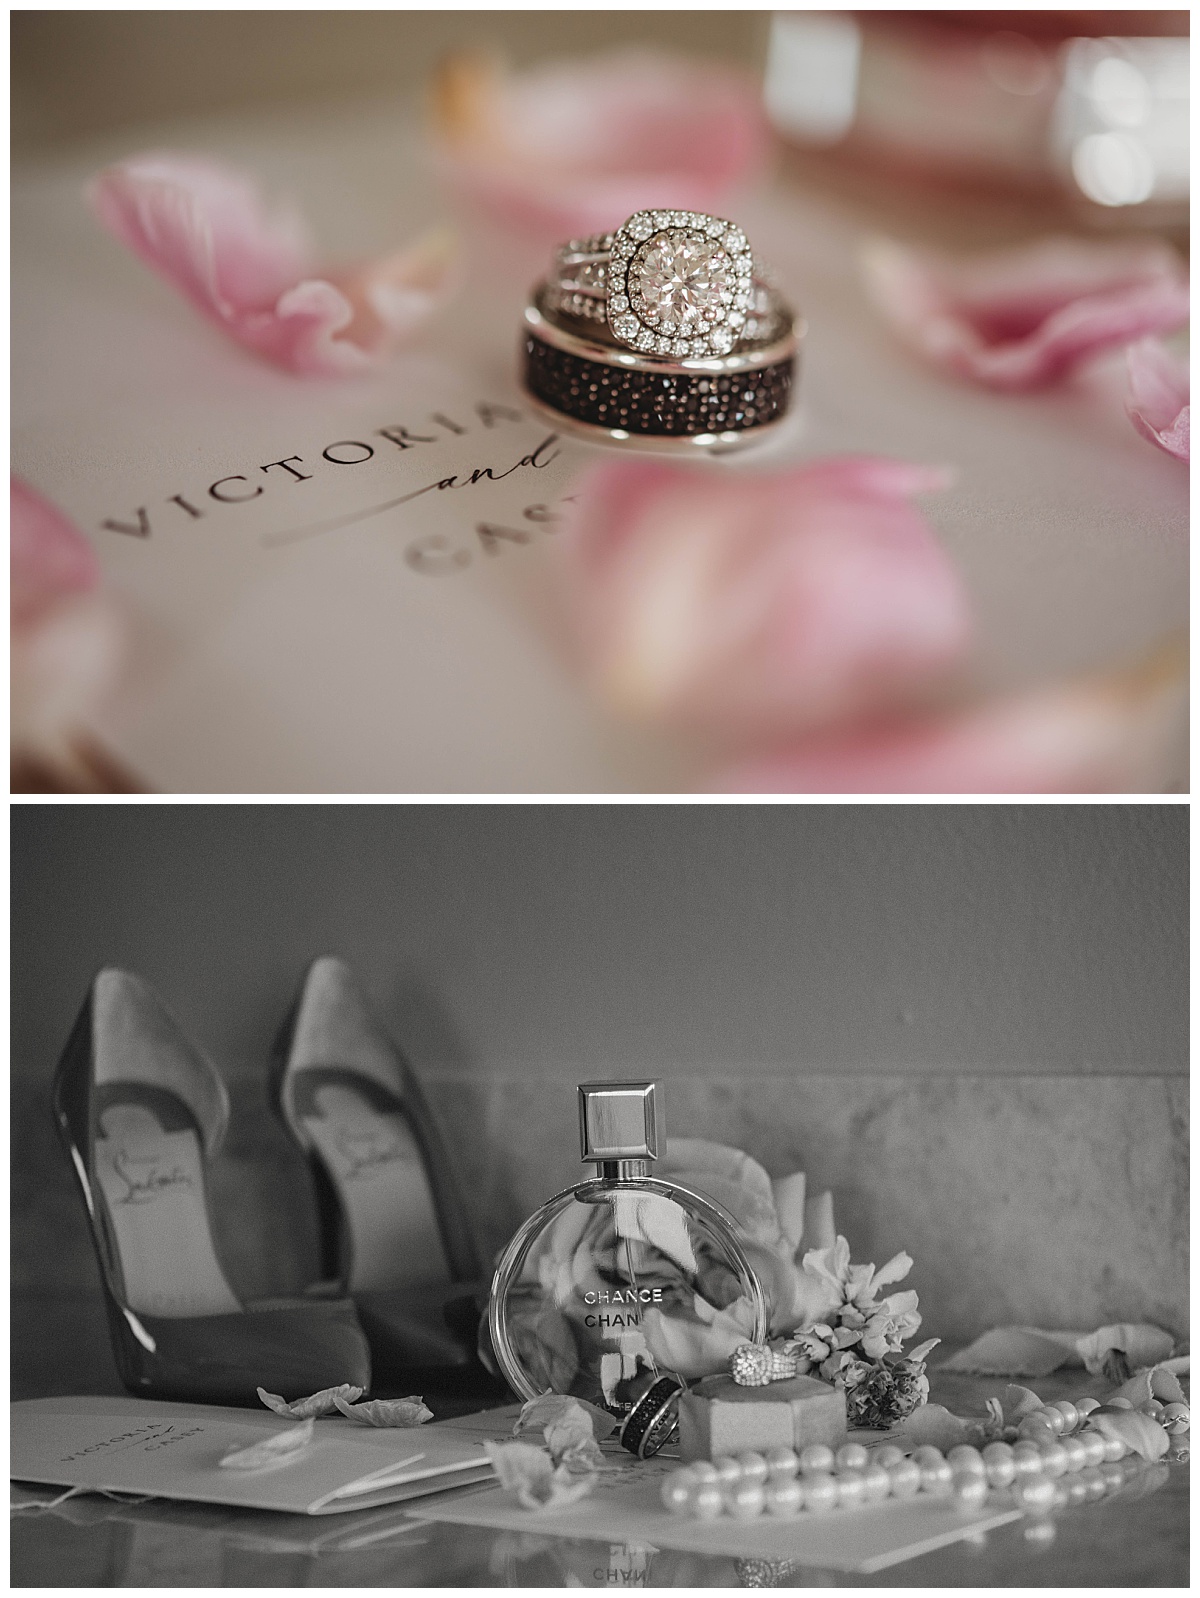 Rings and jewelry details for upscale Texas wedding